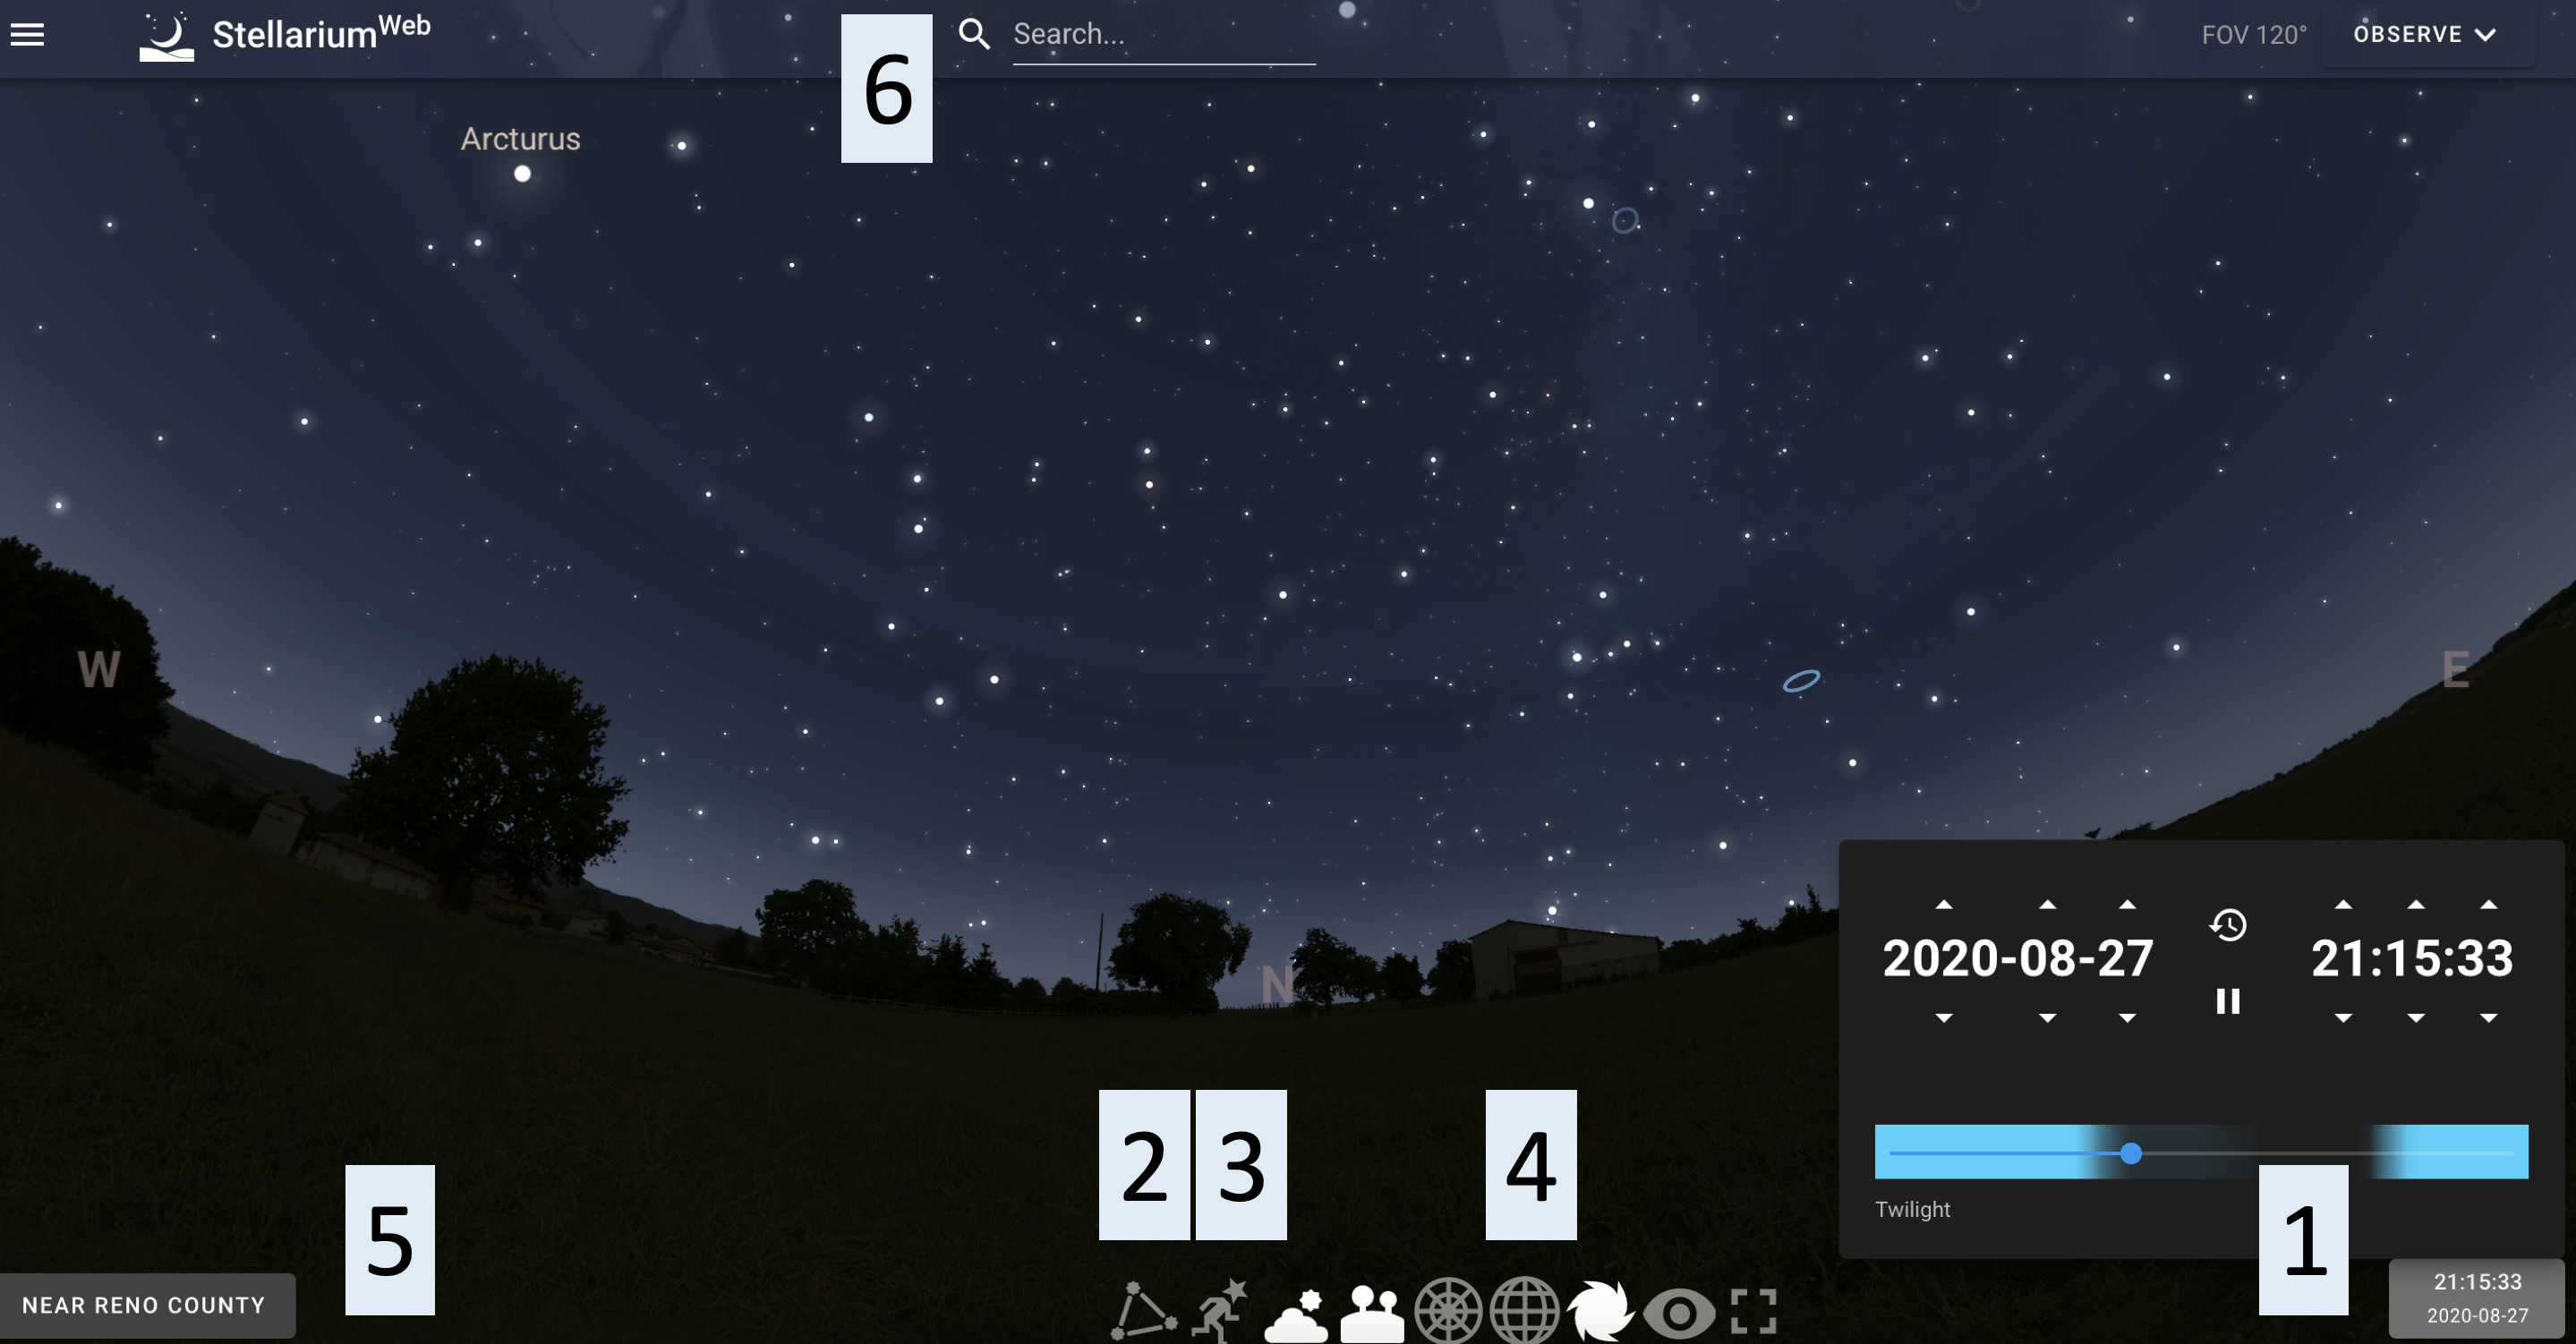 A digital view of the night sky. The label 1 is by a menu in the bottom right corner, the label 2, 3, and 4 are by a menu in the bottom center, the label 5 is by a menu in the bottom left corner, and the label 6 is by a menu at the top center.